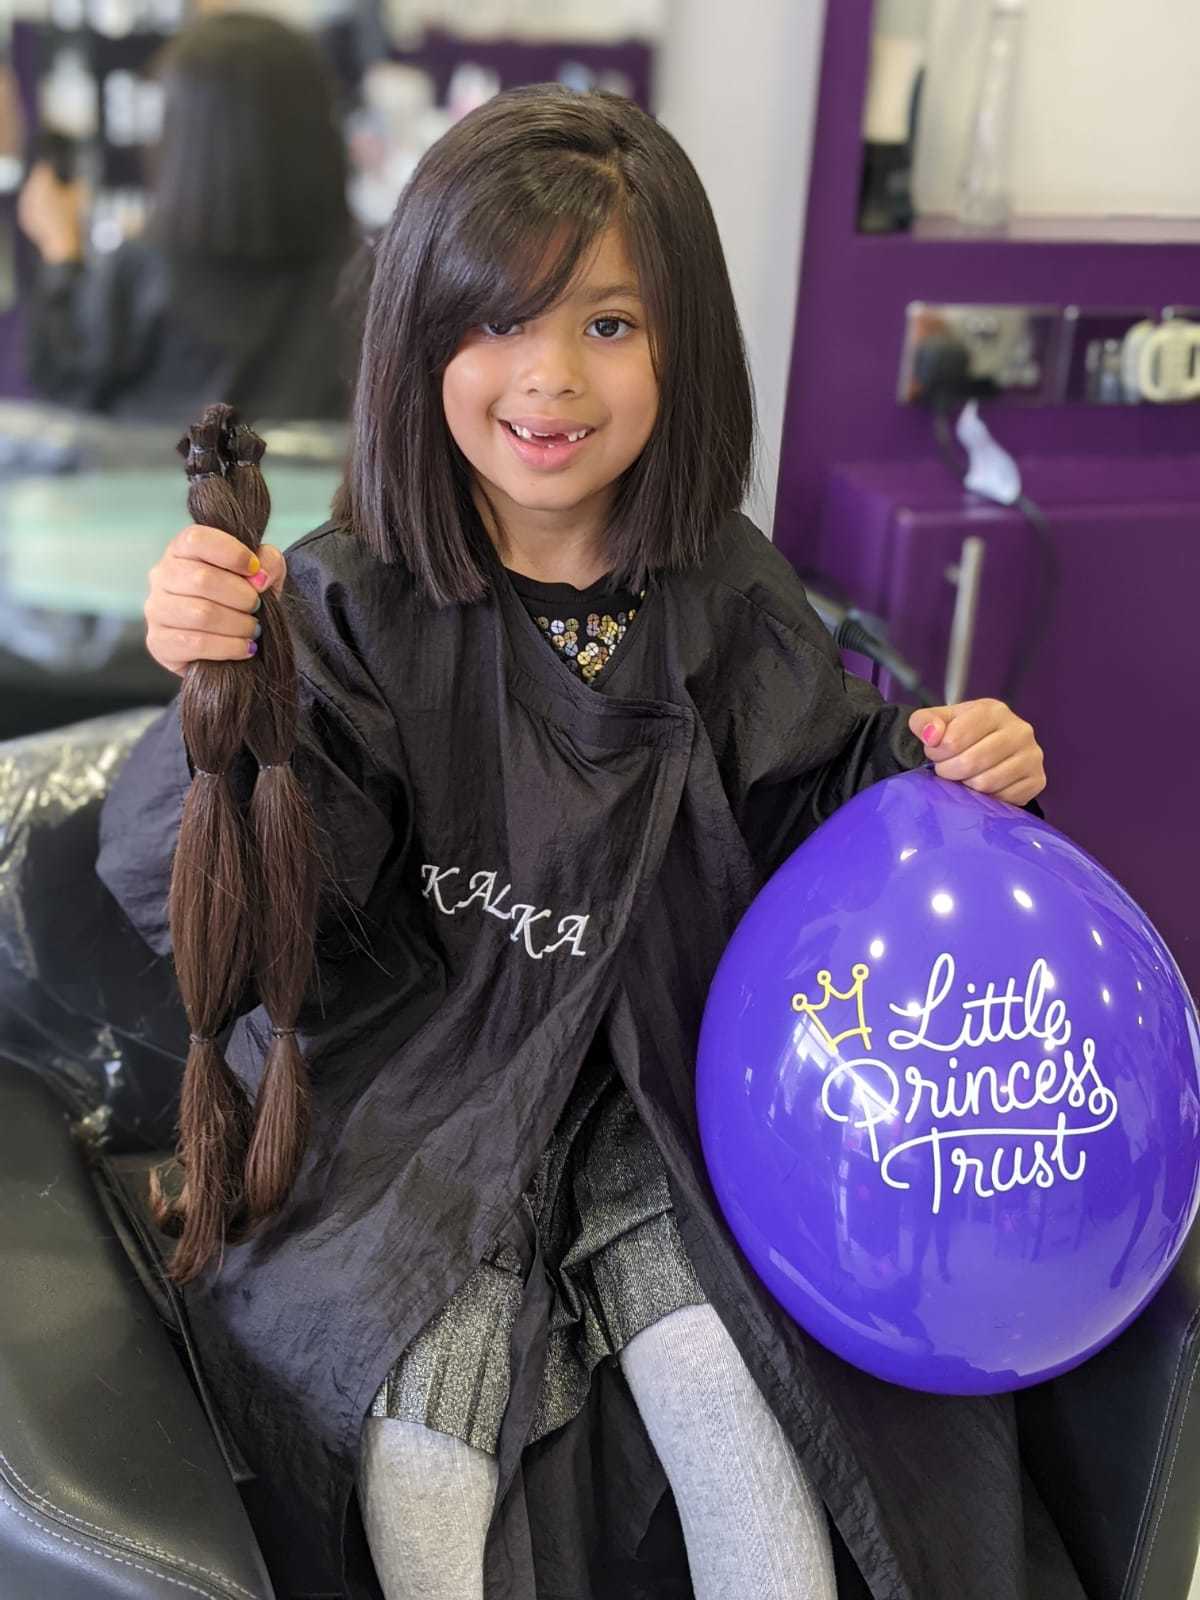 Nikki after her haicut and holding her hair that she is donating to the Little Princess Trust. Credit: Tina Nandha